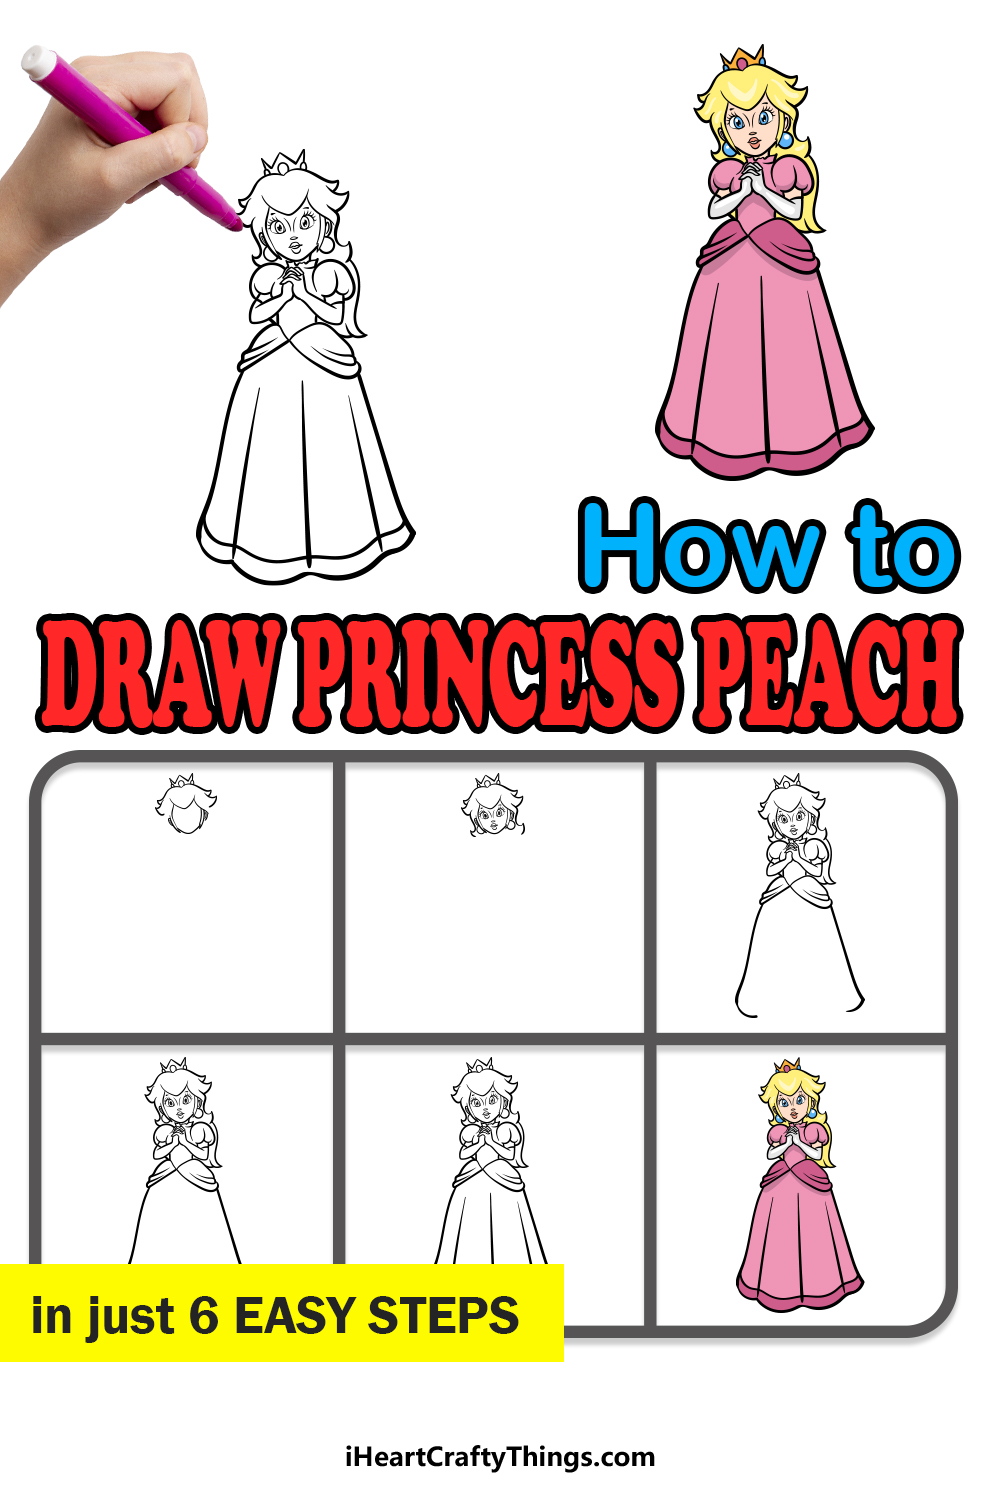 how to draw Princess Peach in 6 easy steps